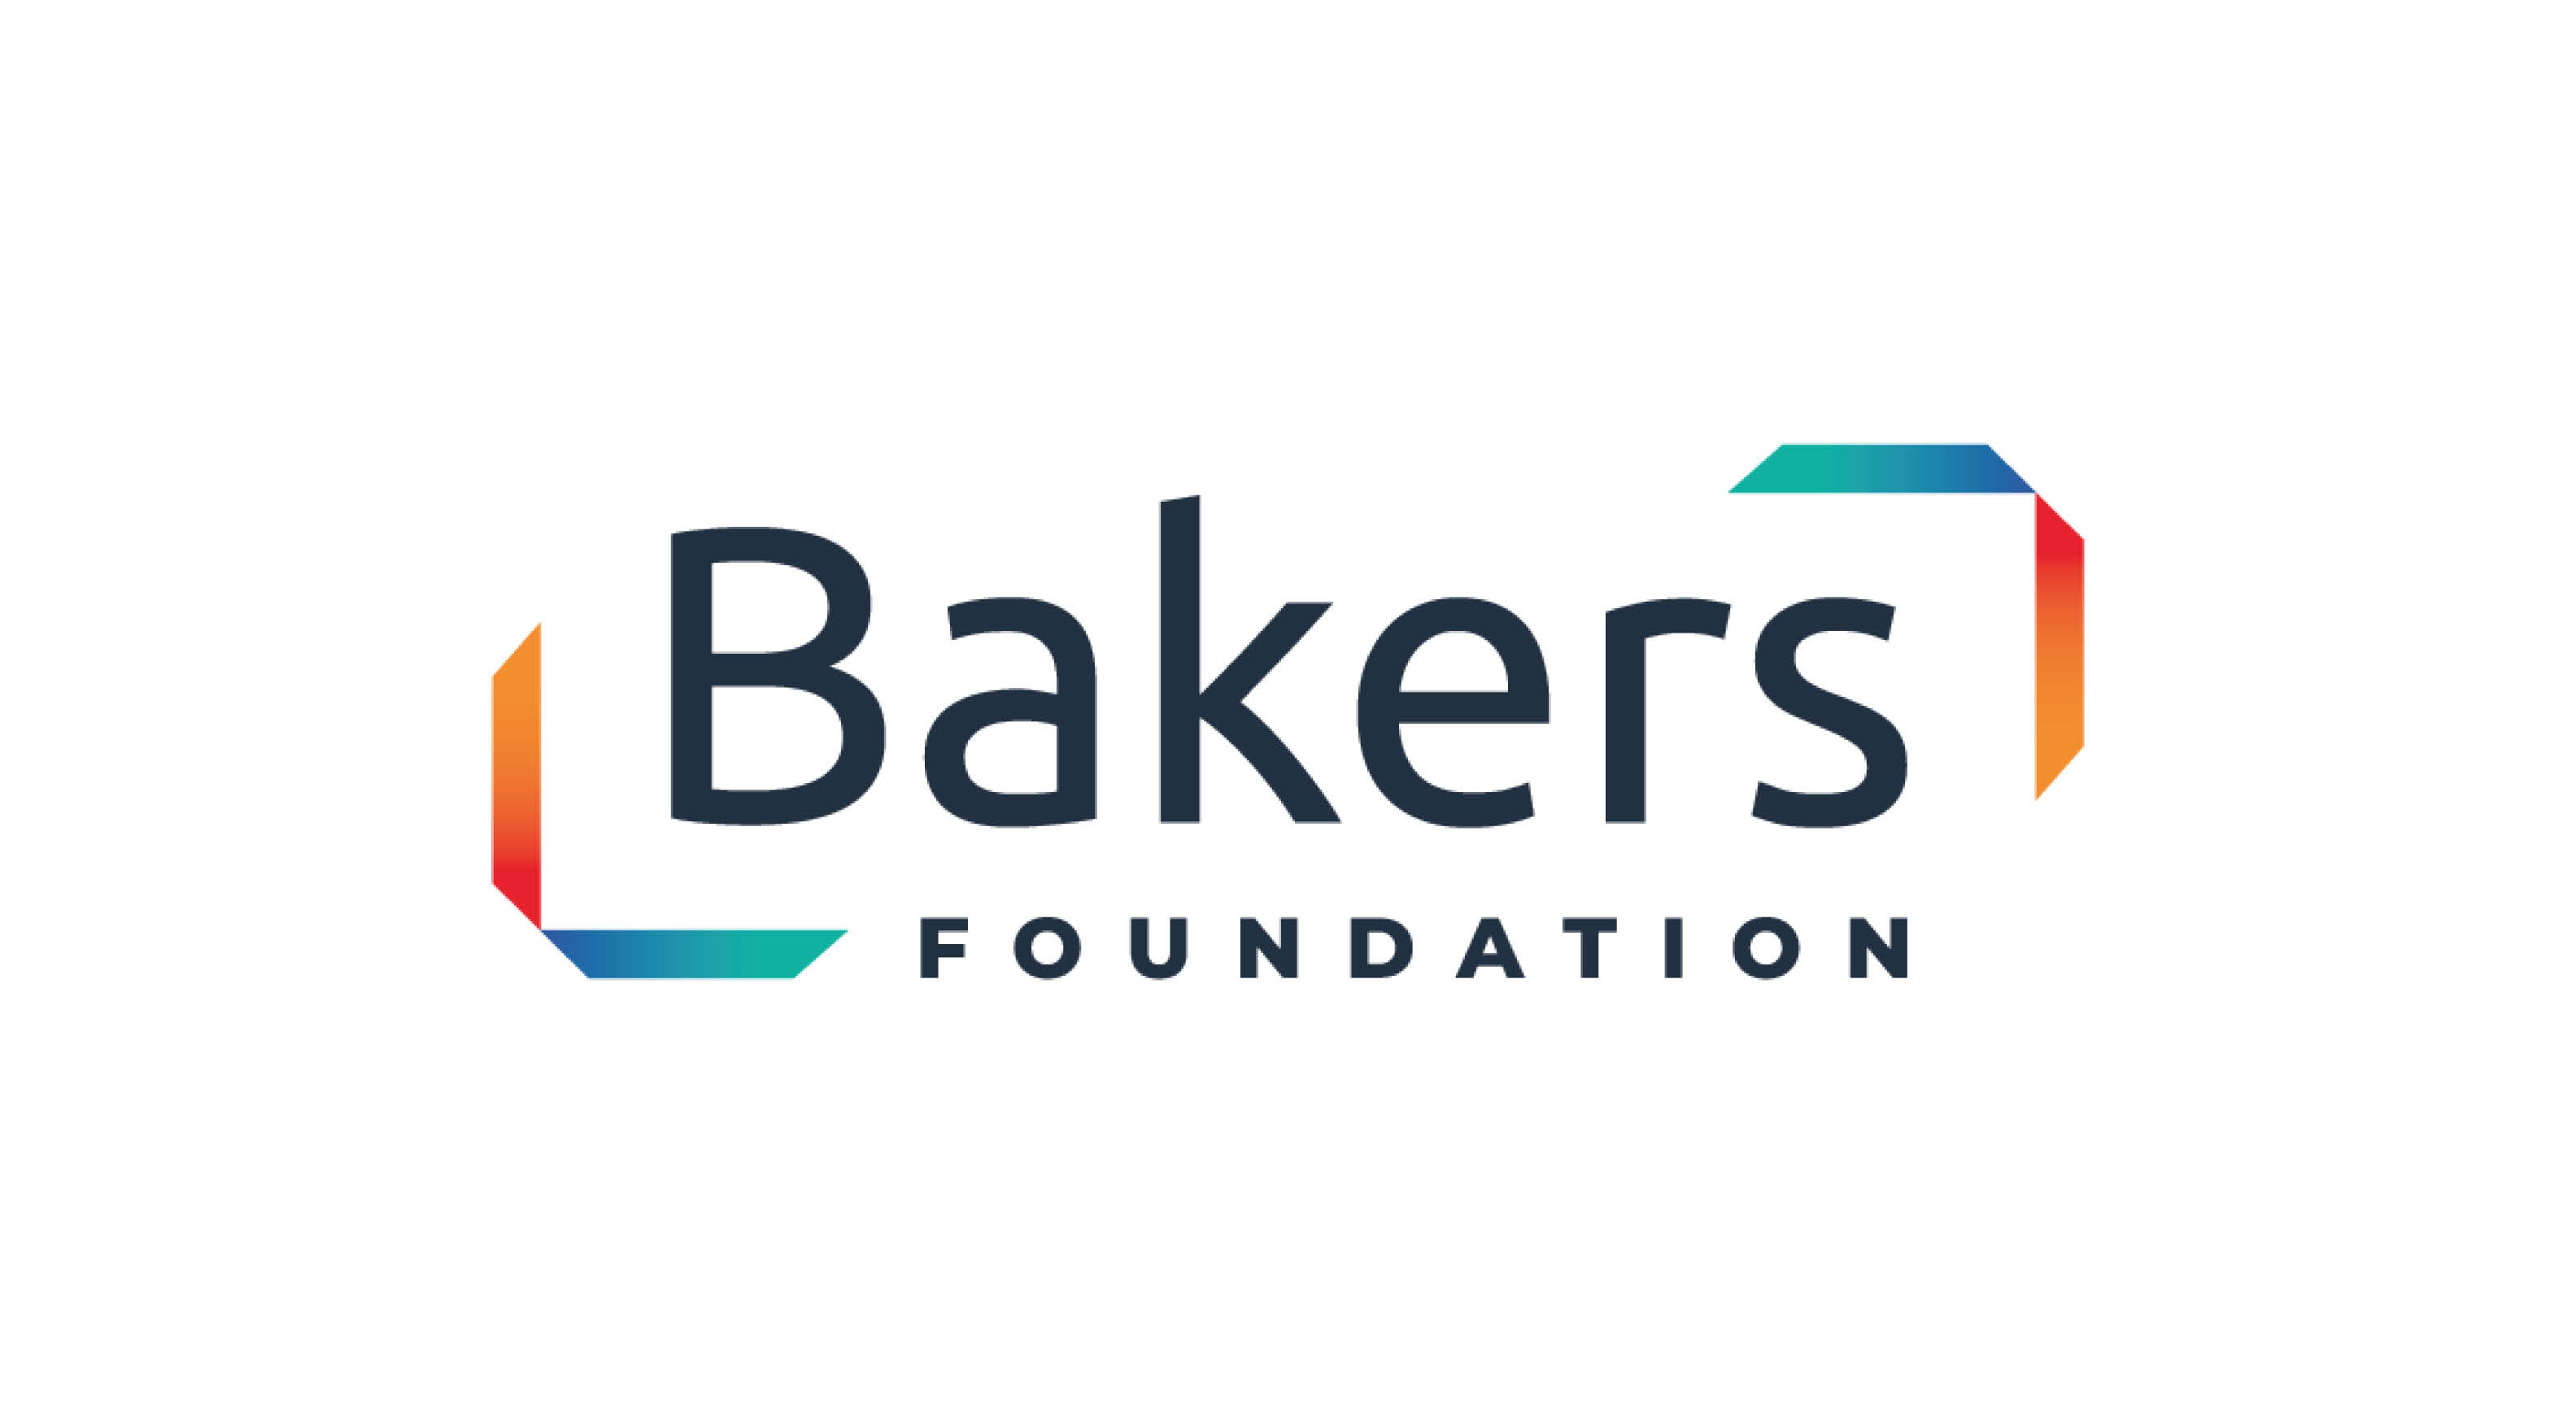 The Bakers Foundation